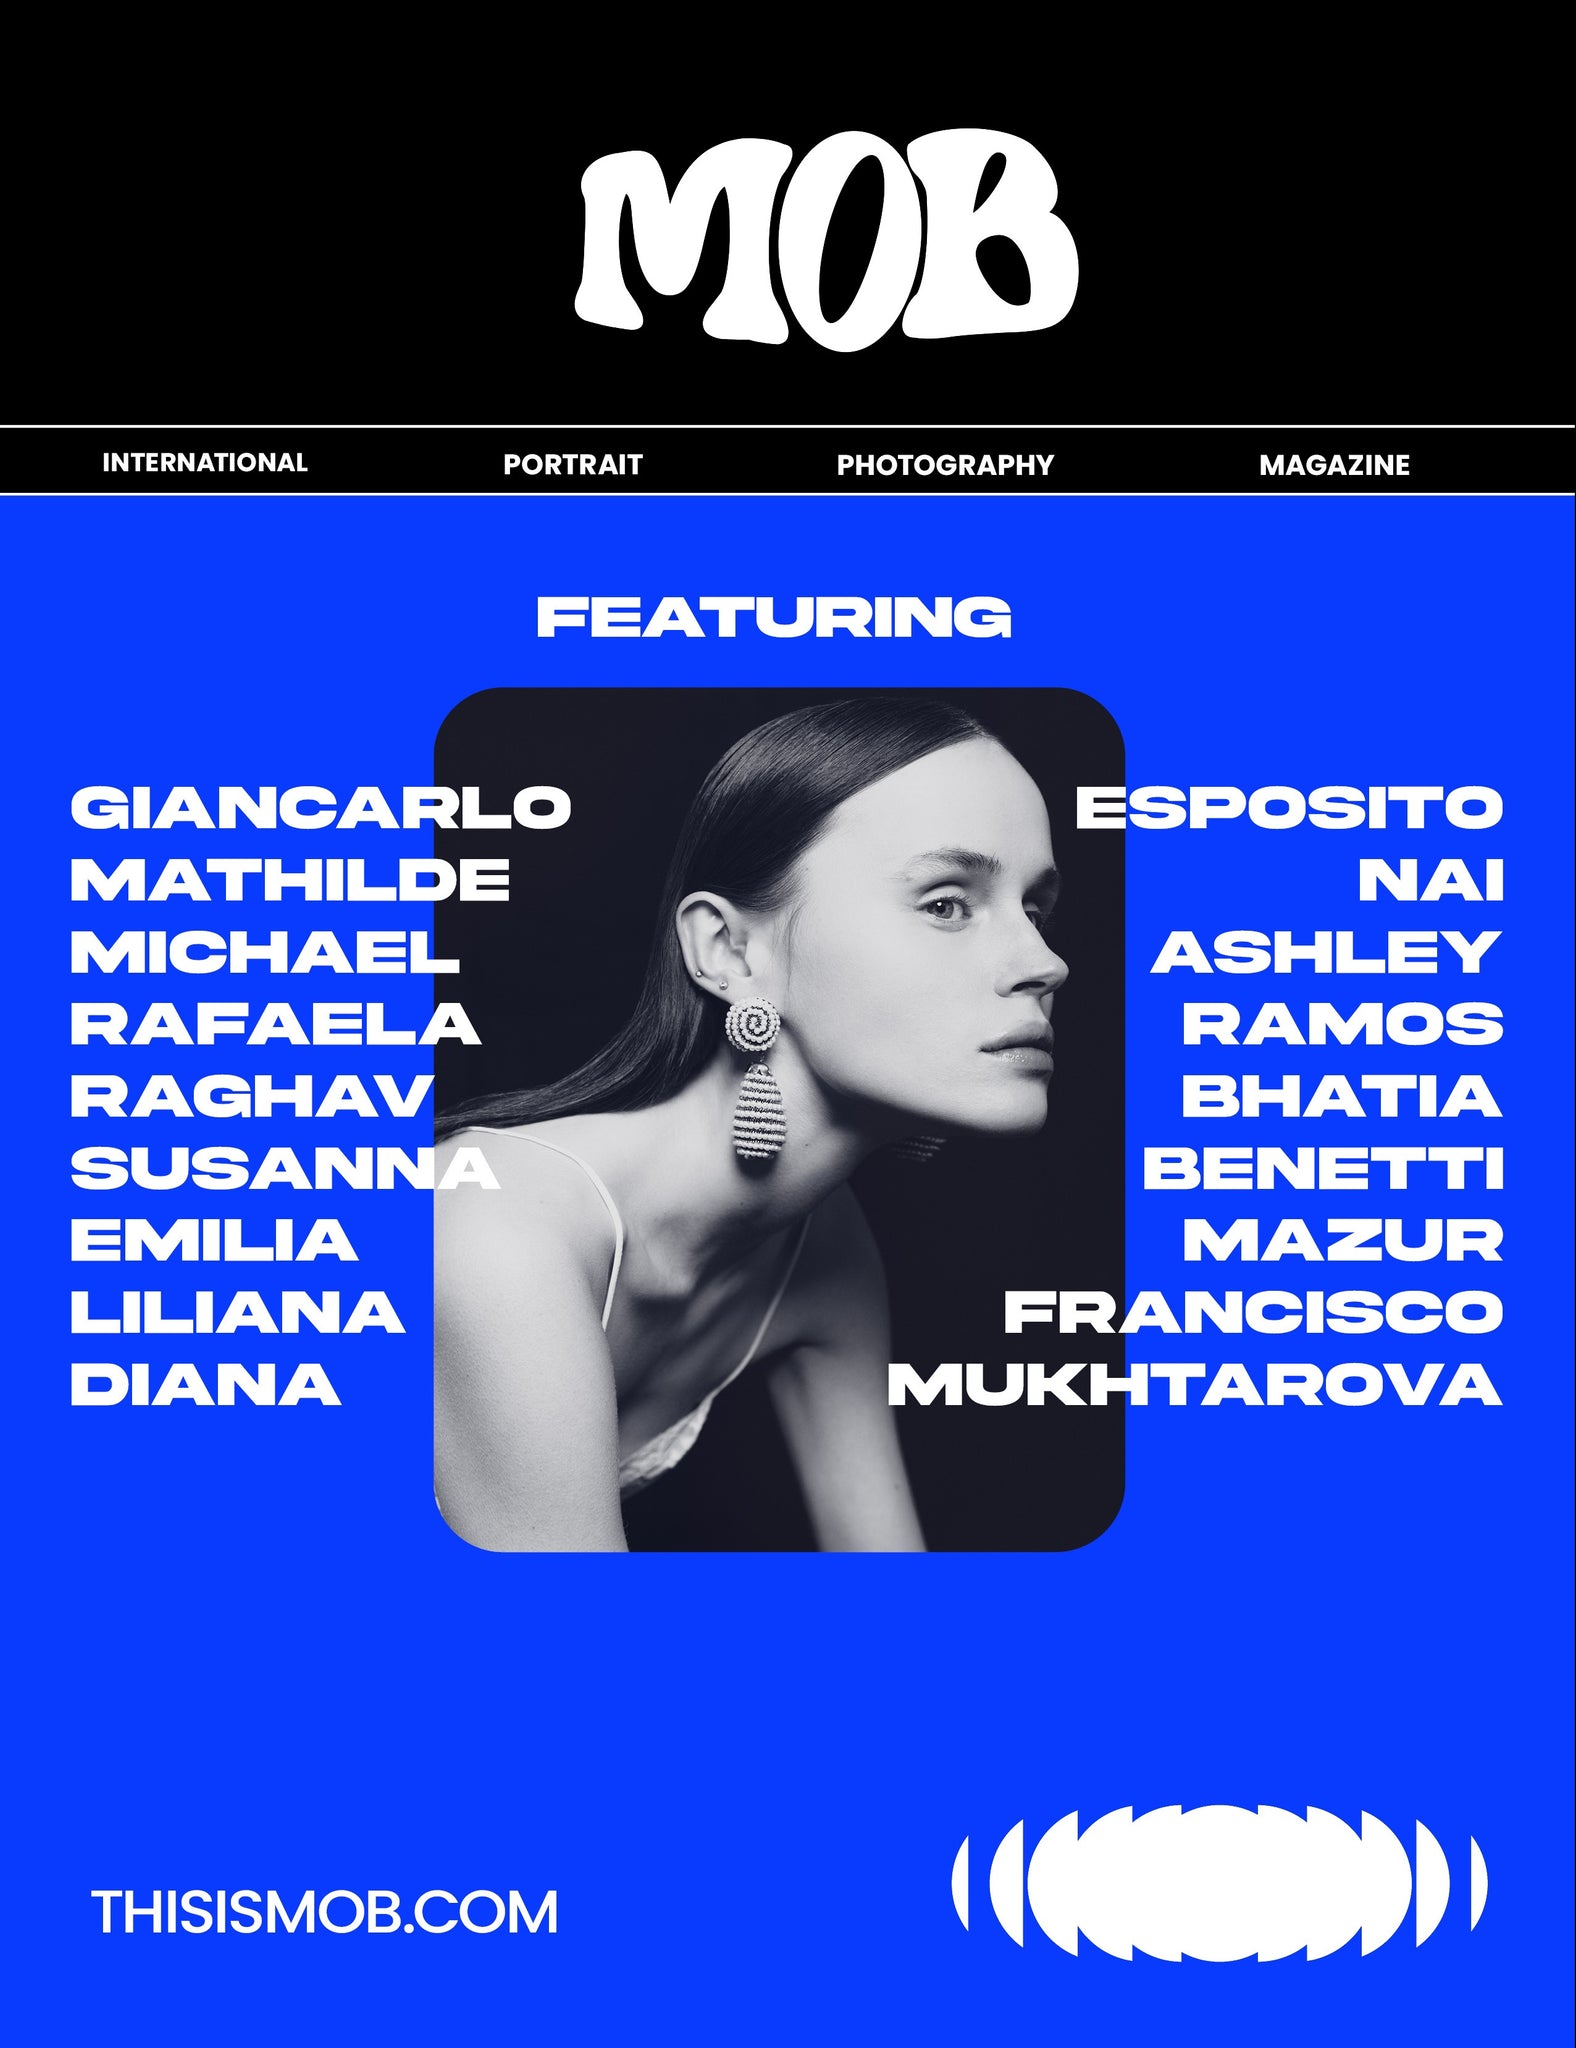 MOB JOURNAL | VOLUME THIRTY | ISSUE #03